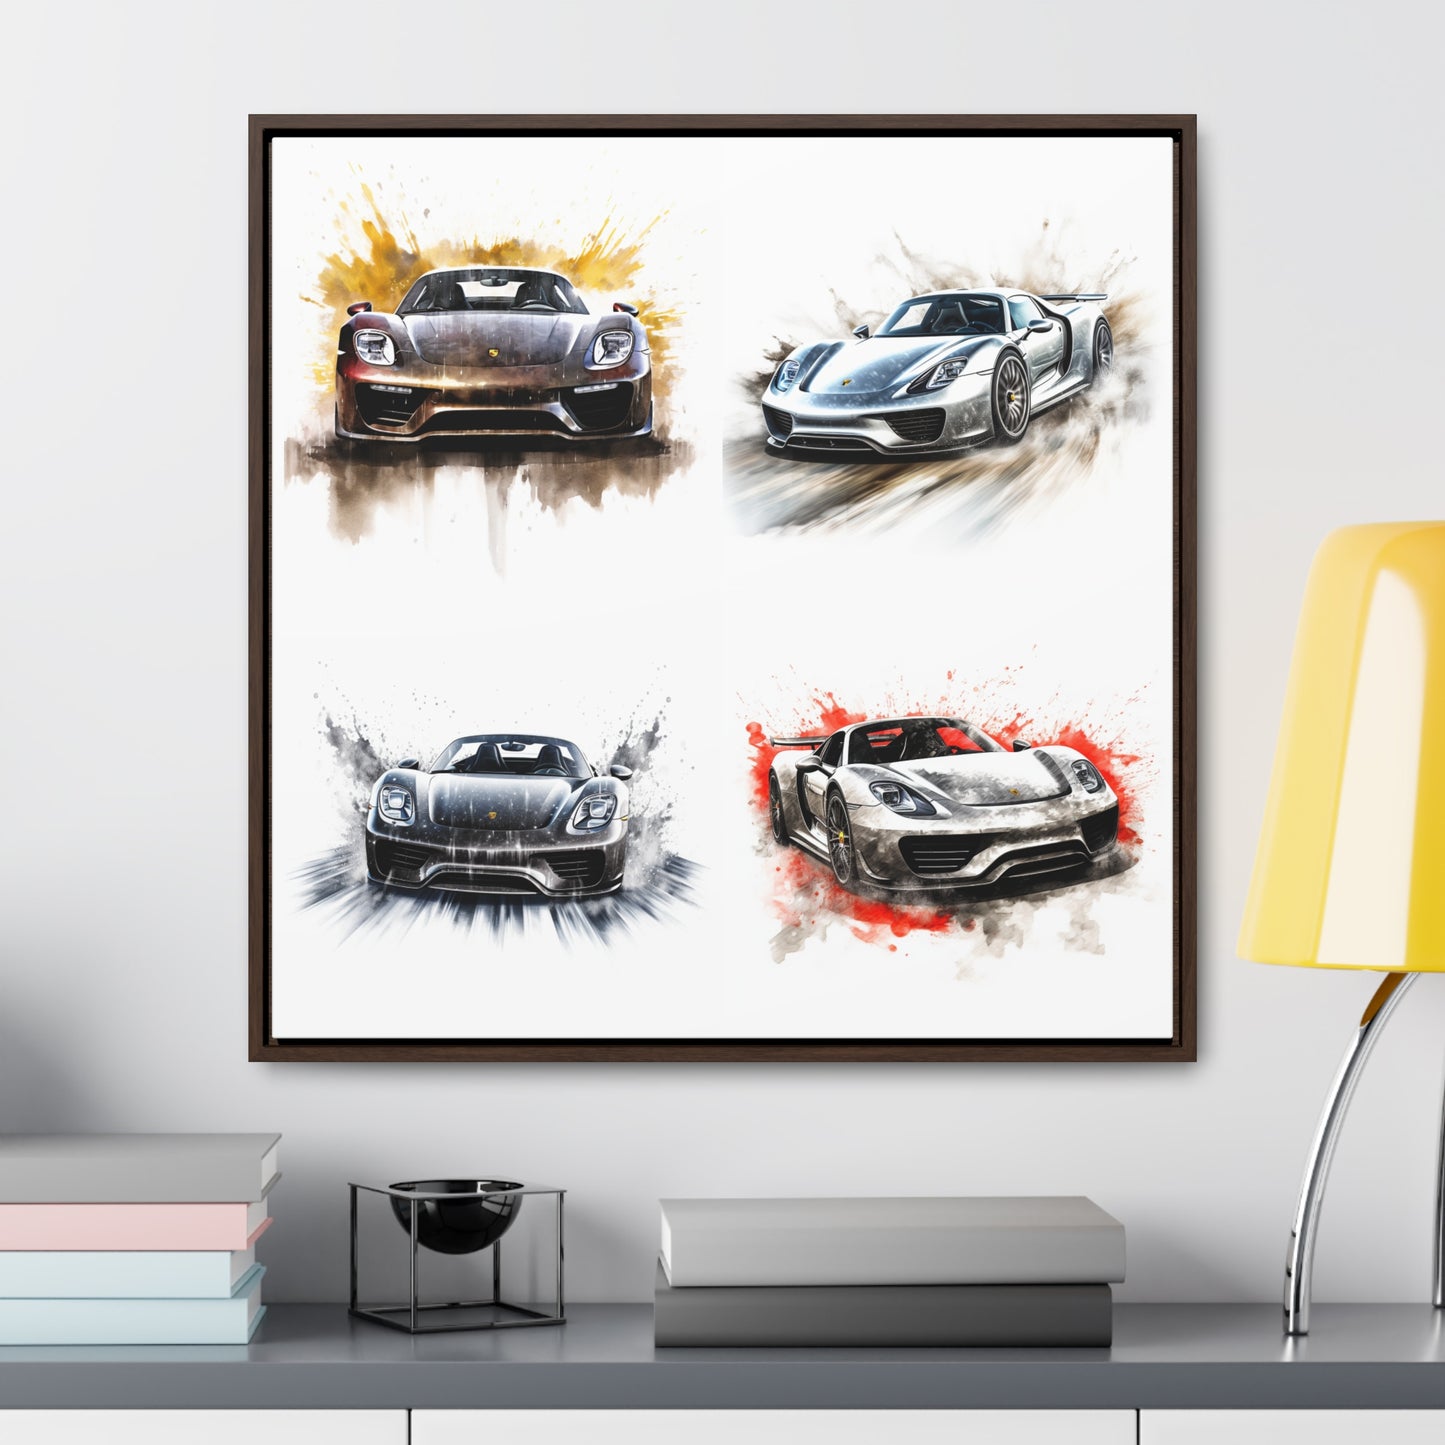 Gallery Canvas Wraps, Square Frame 918 Spyder white background driving fast with water splashing 5